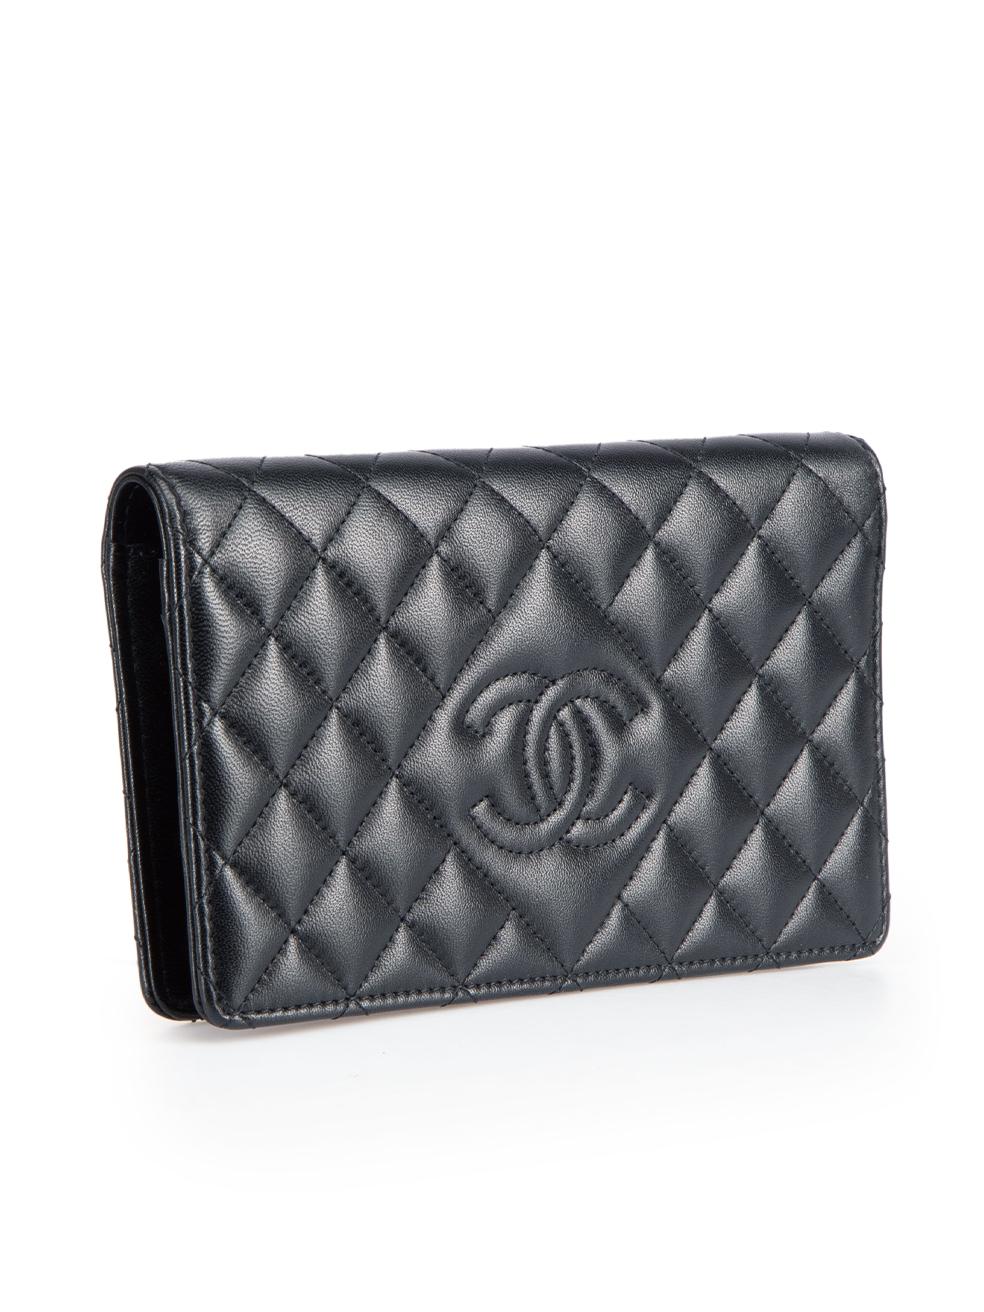 CONDITION is Very good. Minimal wear to the wallet is evident. Minimal wear to the inside is seen with a few small marks on this used Chanel designer resale item. This item comes with an original dust bag.
 
 
 
 Details
 
 
 Black
 
 Leather
 
